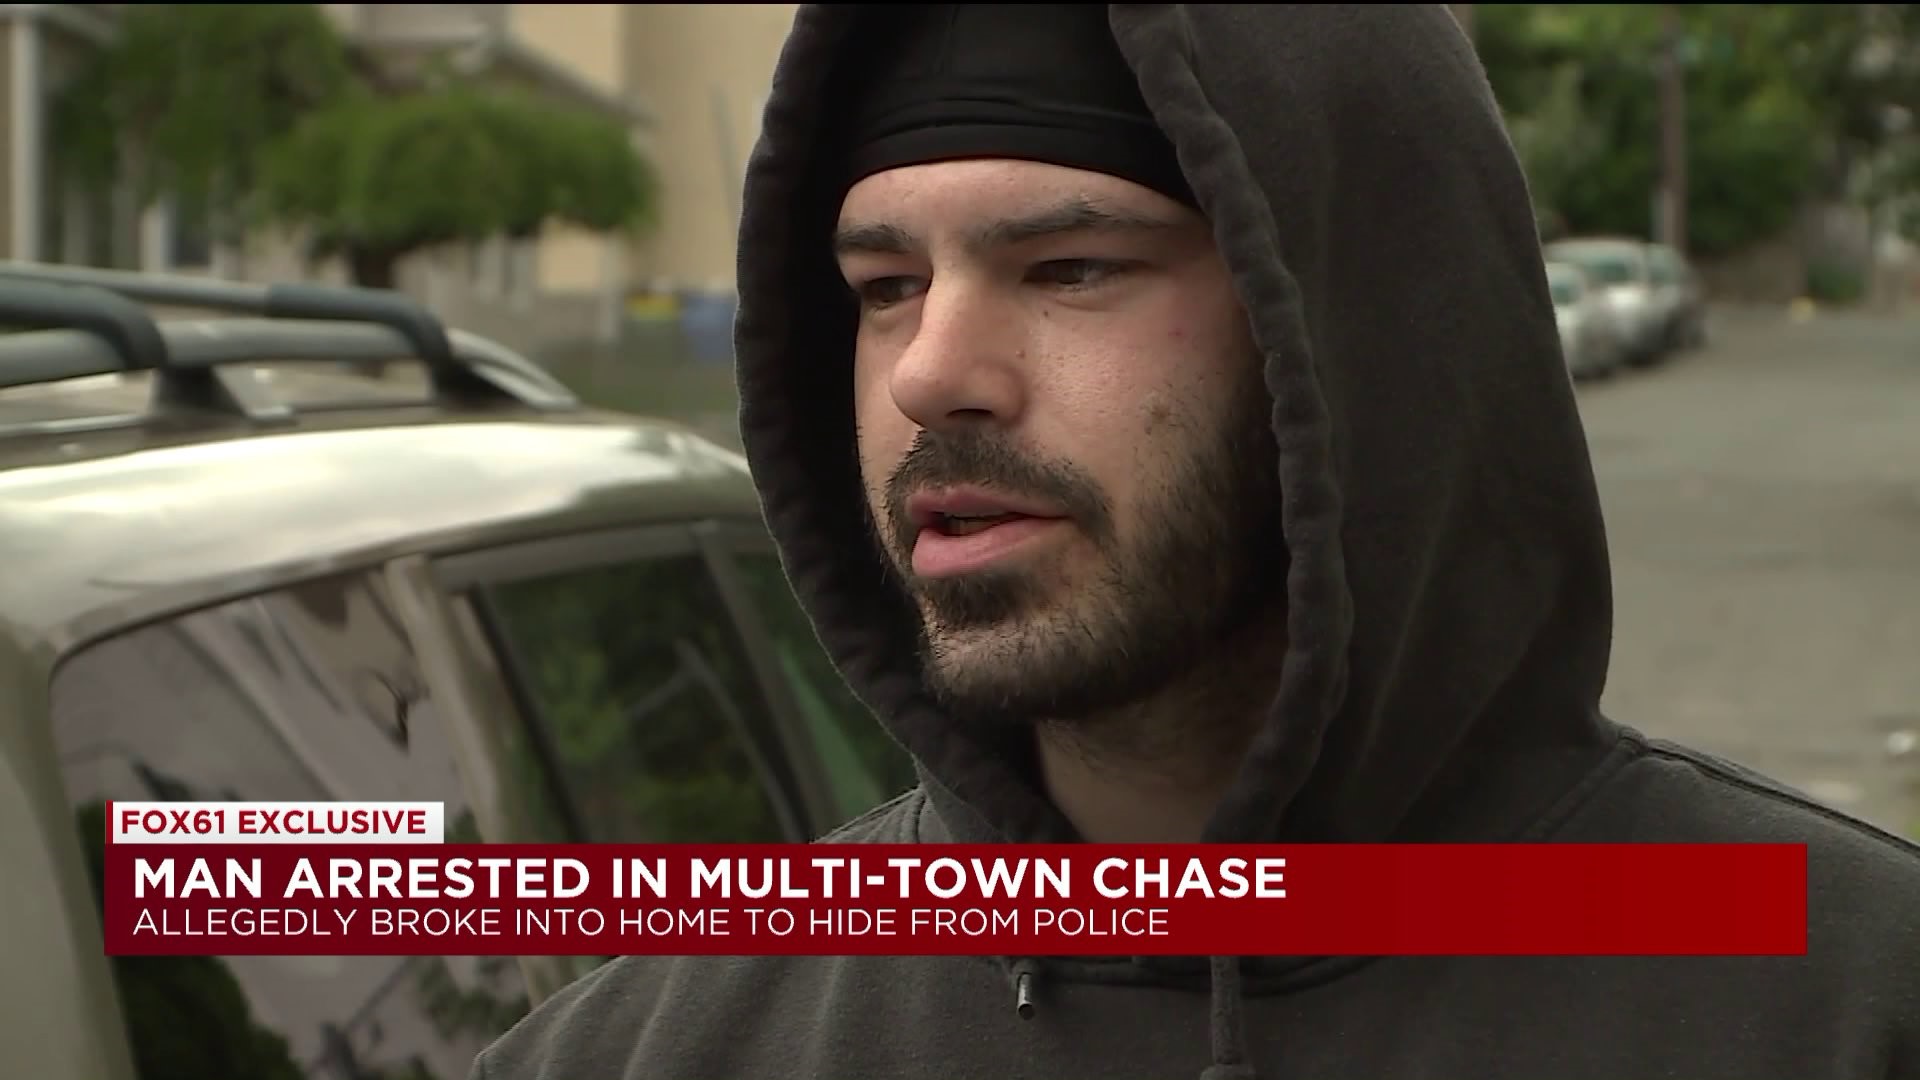 Man arrested in multi-town chase